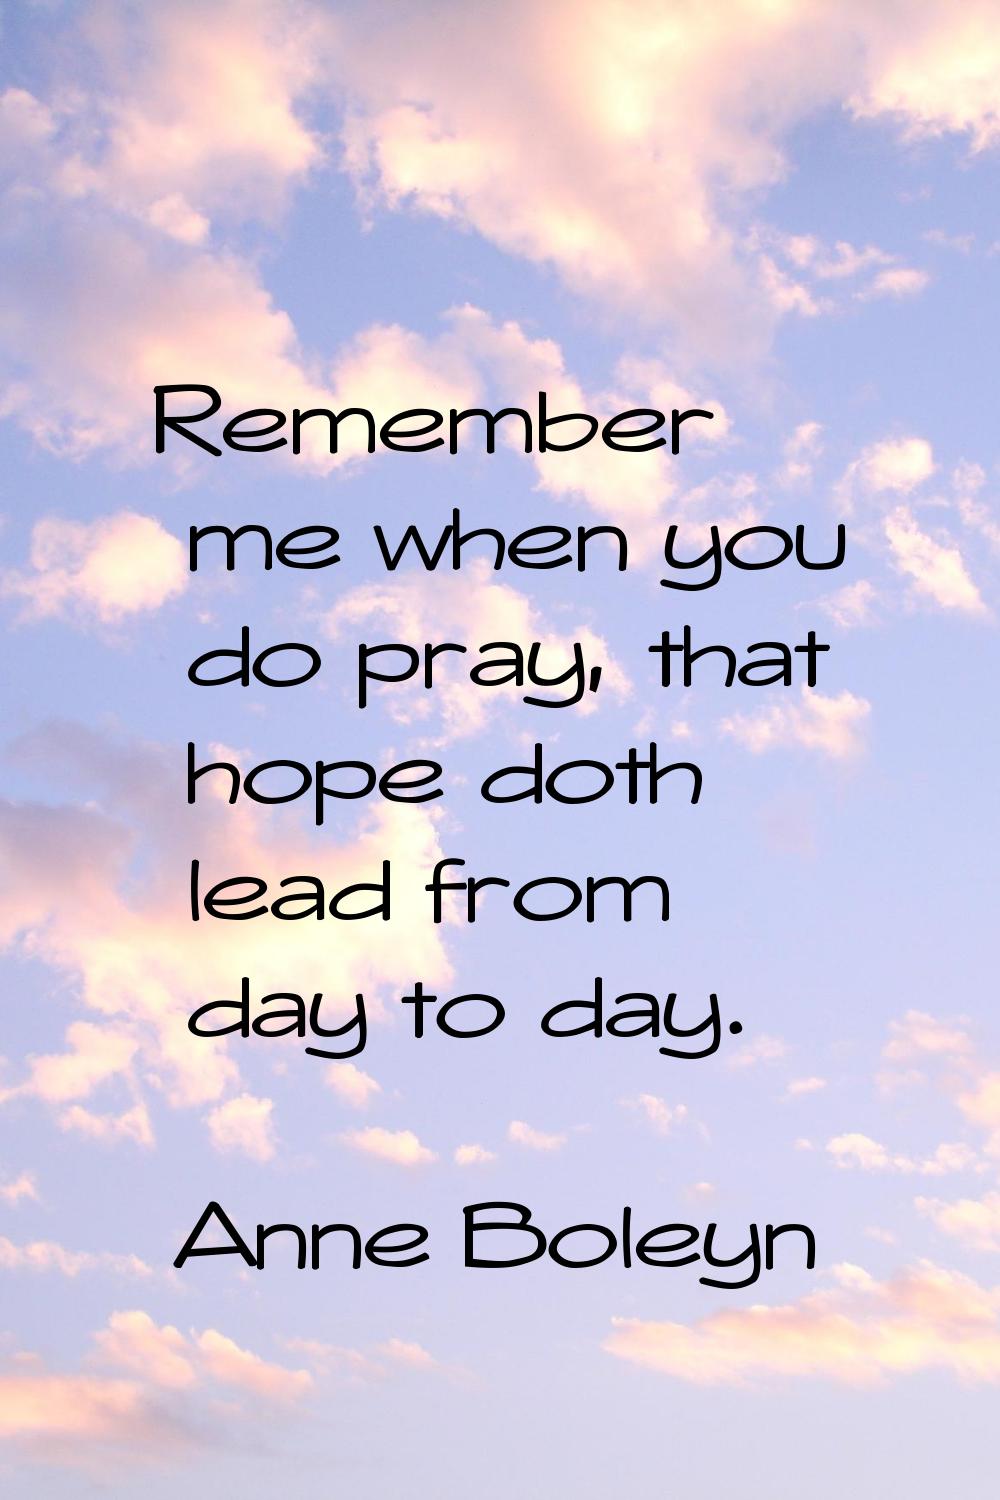 Remember me when you do pray, that hope doth lead from day to day.